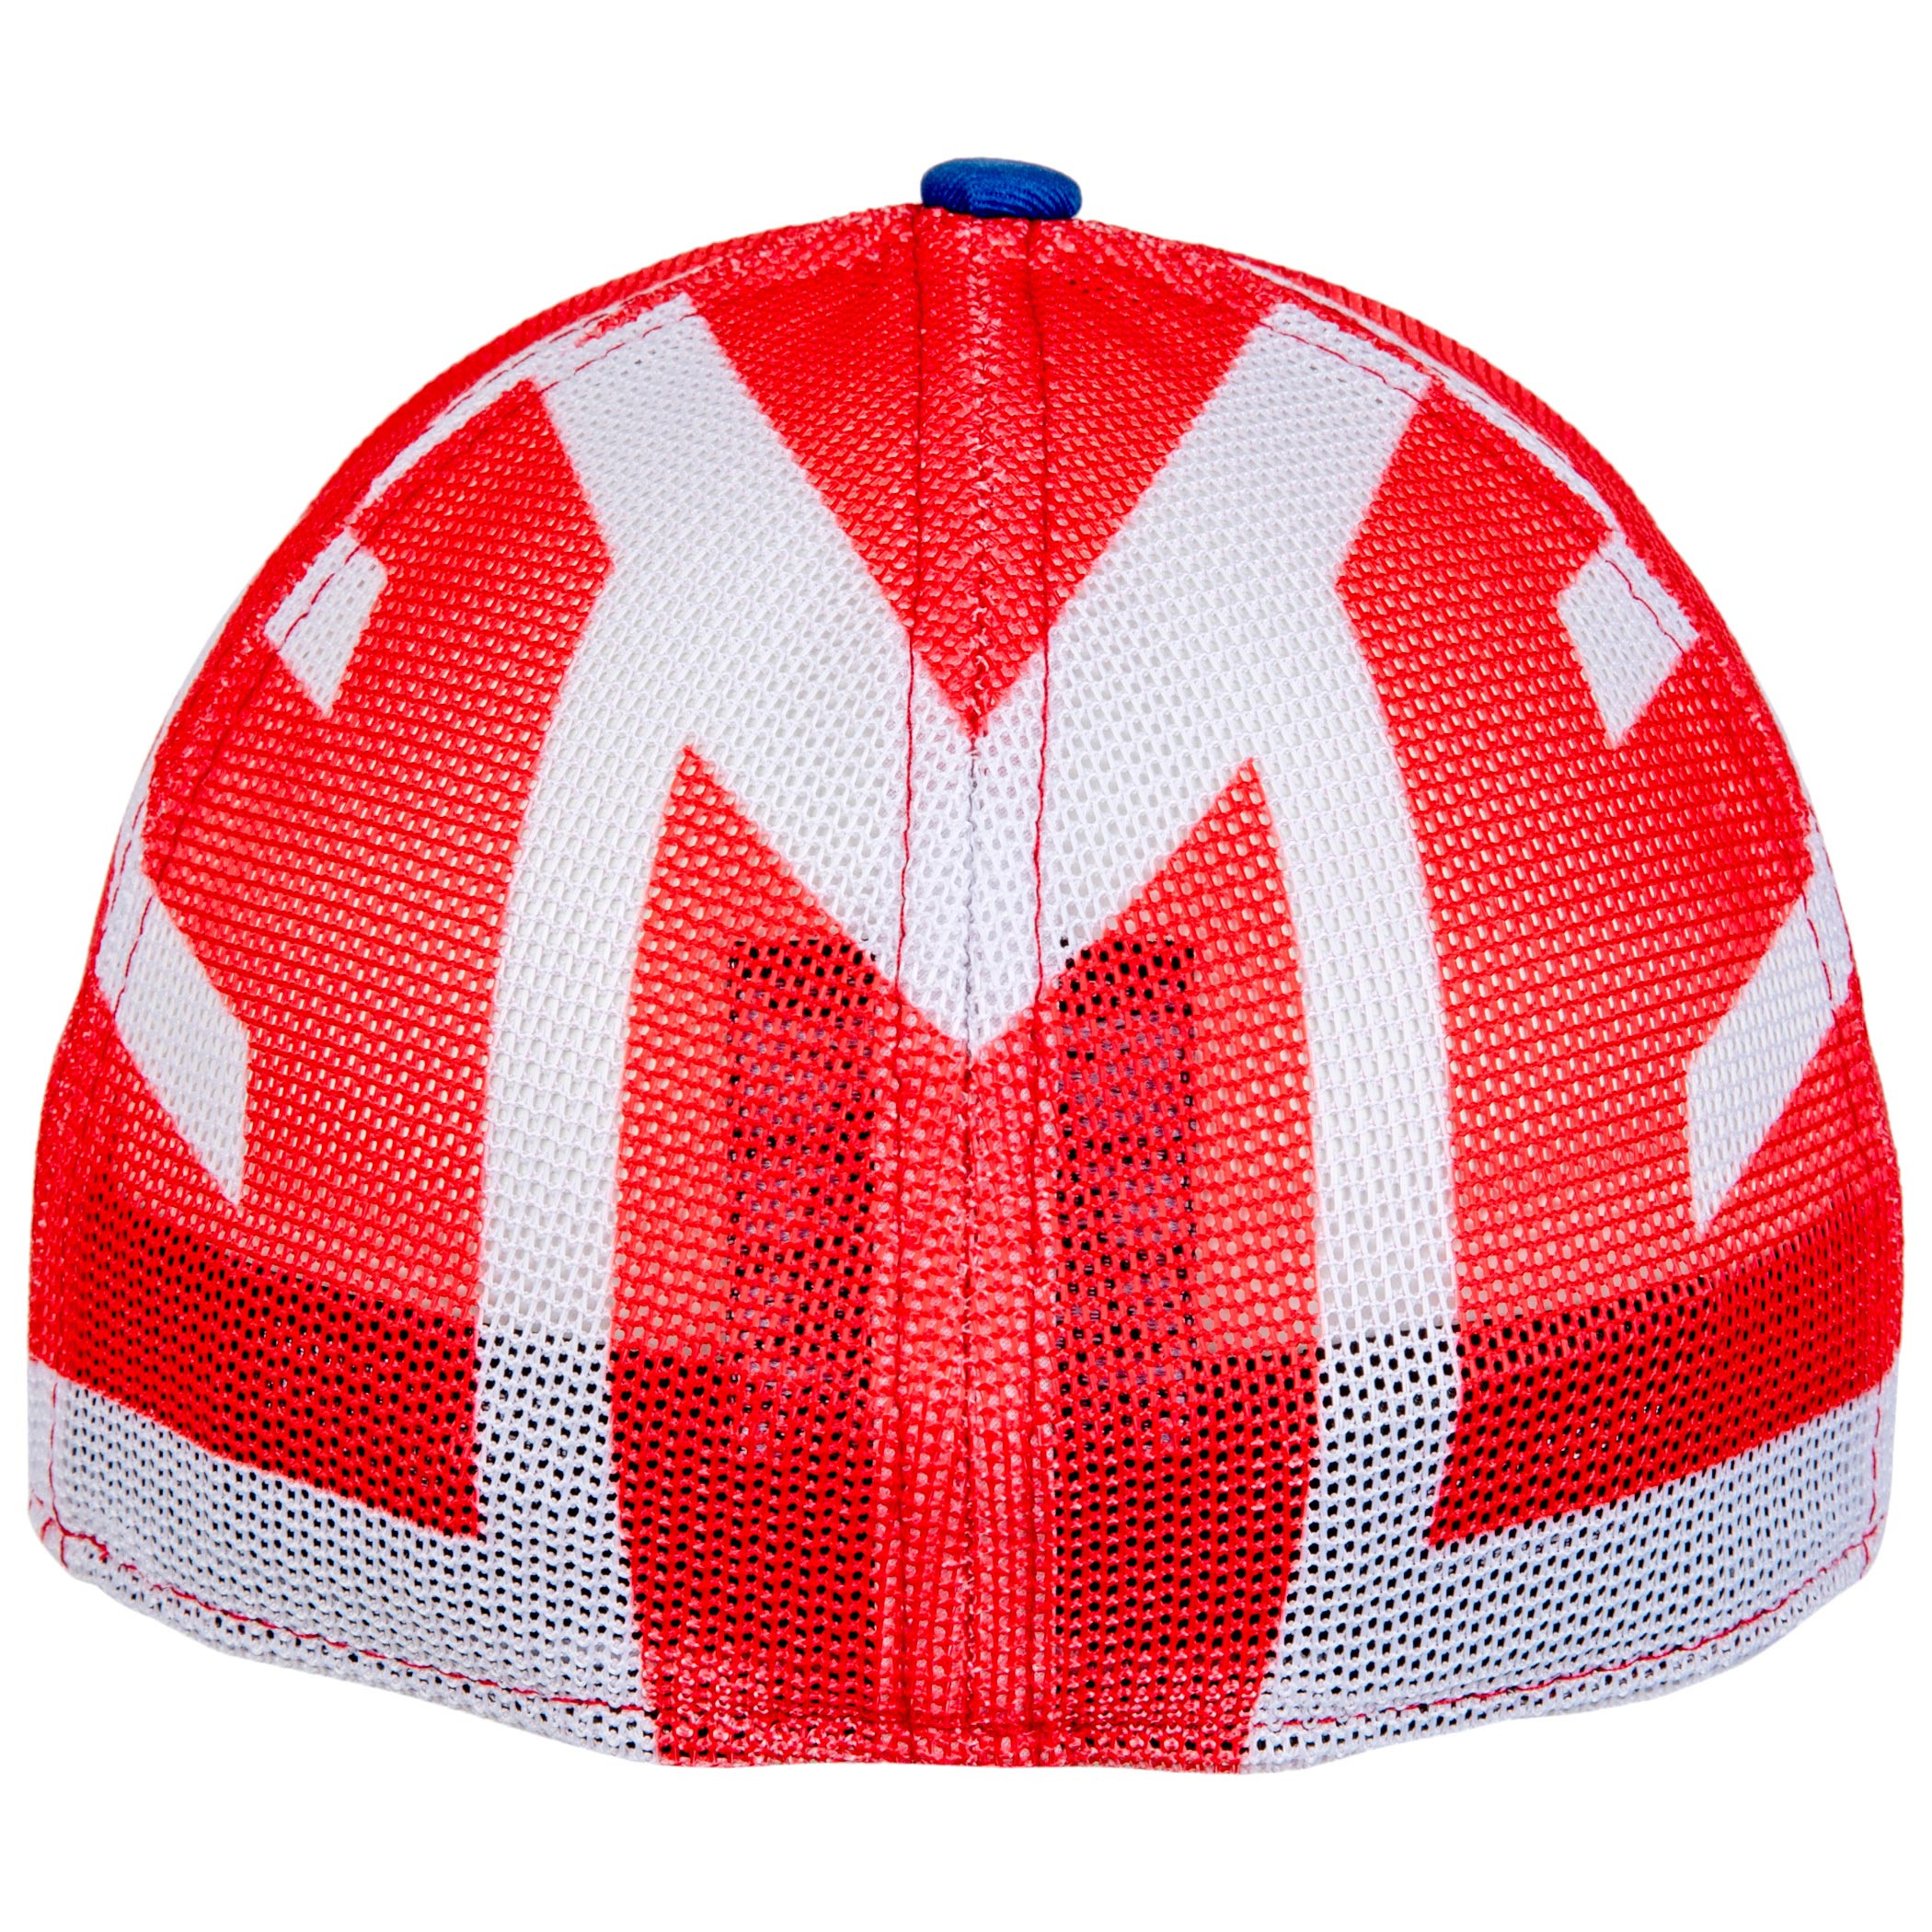 Transformers Autobots New Era 39Thirty Fitted Mesh Hat